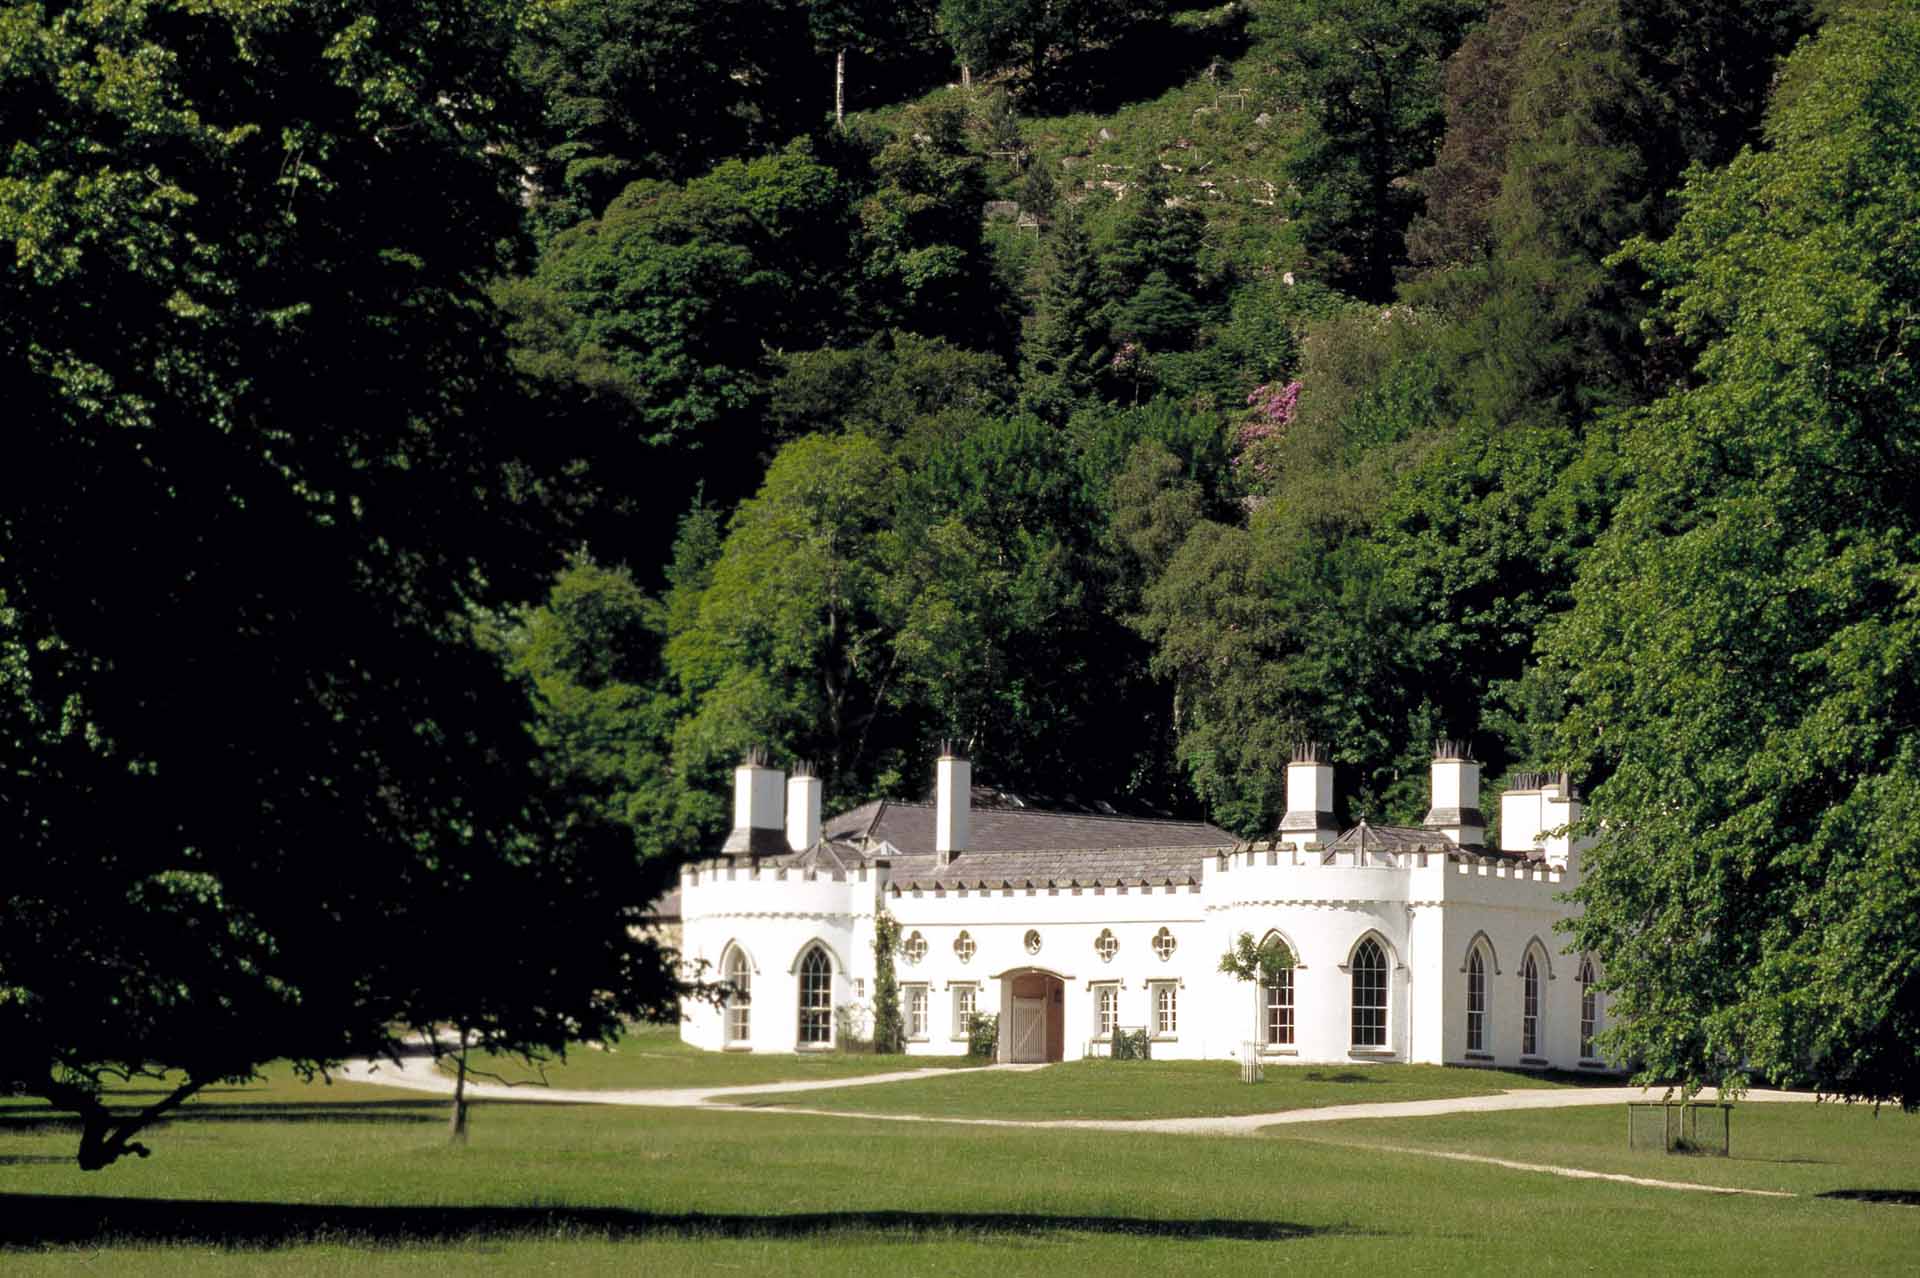 GEE for Luggala Lodge